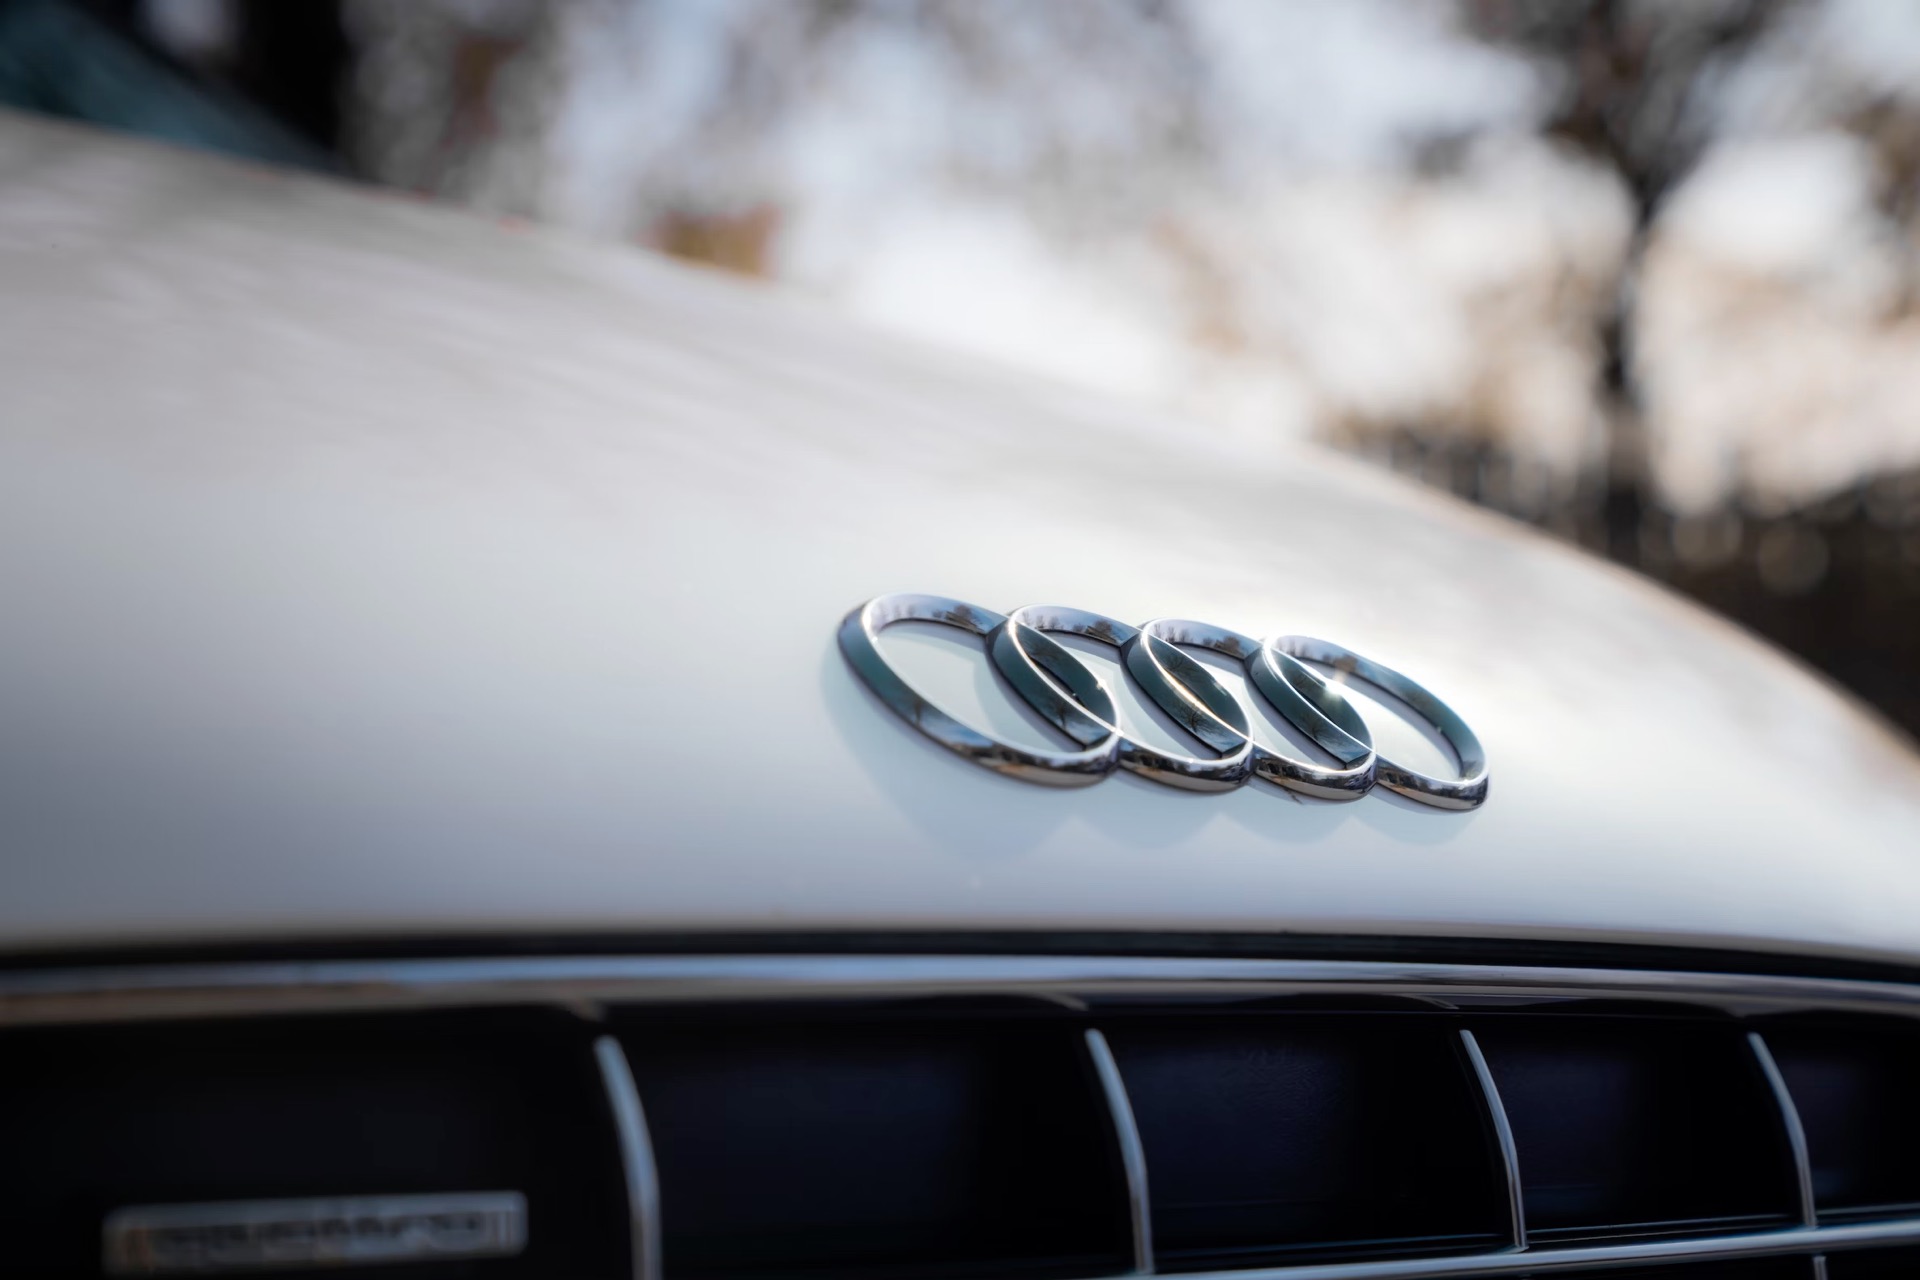 Download wallpapers Audi golden logo, cars brands, artwork, brown metal  background, creative, Audi logo, brands, Audi for desktop with resolution  2560x1600. High Quality HD pictures wallpapers